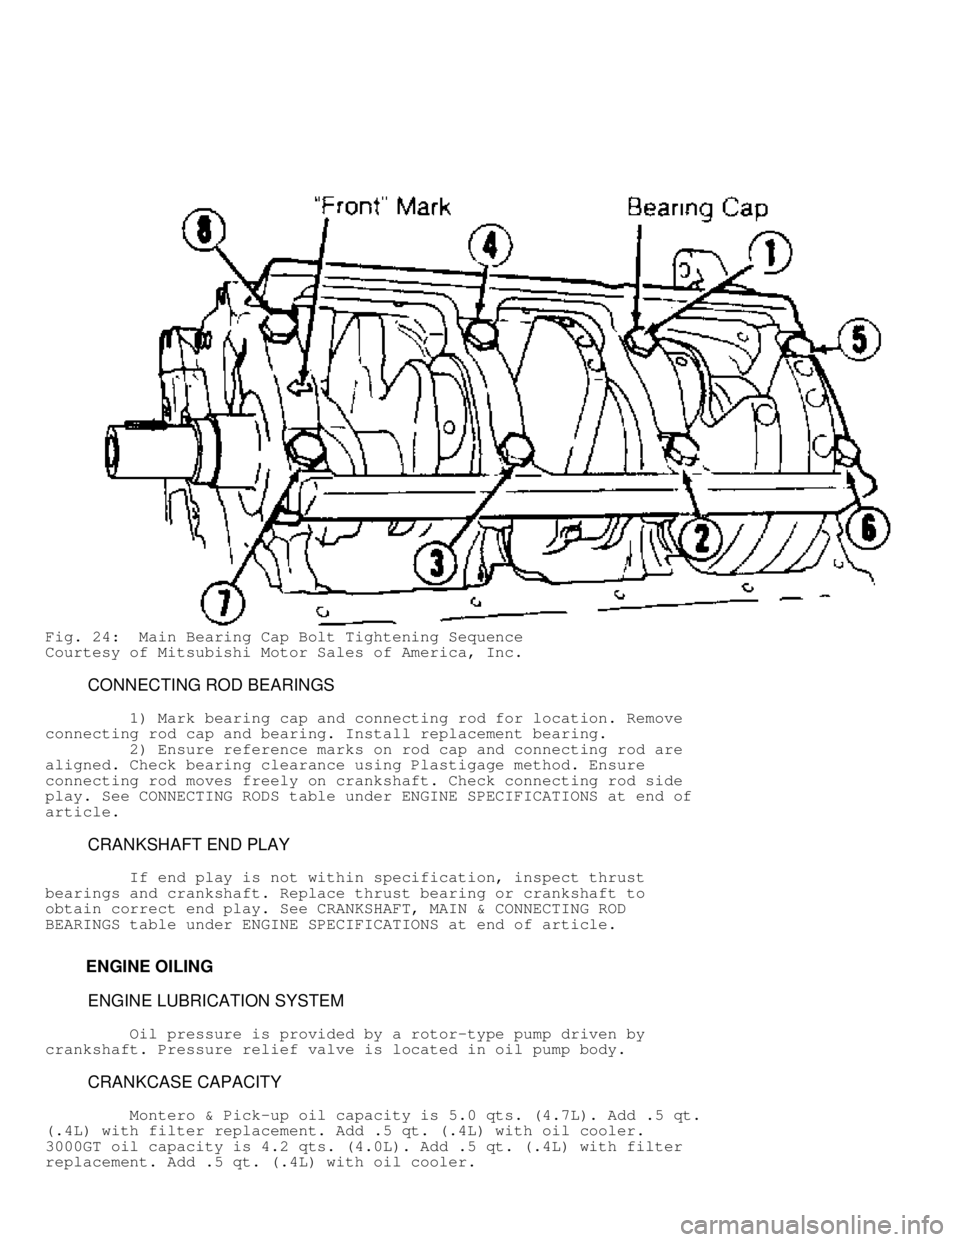 MITSUBISHI MONTERO 1991  Service Manual Fig. 24:  Main Bearing Cap Bolt Tightening Sequence
Courtesy of Mitsubishi Motor Sales of America, Inc.
         CONNECTING ROD BEARINGS
         1) Mark bearing cap and connecting rod for location. R